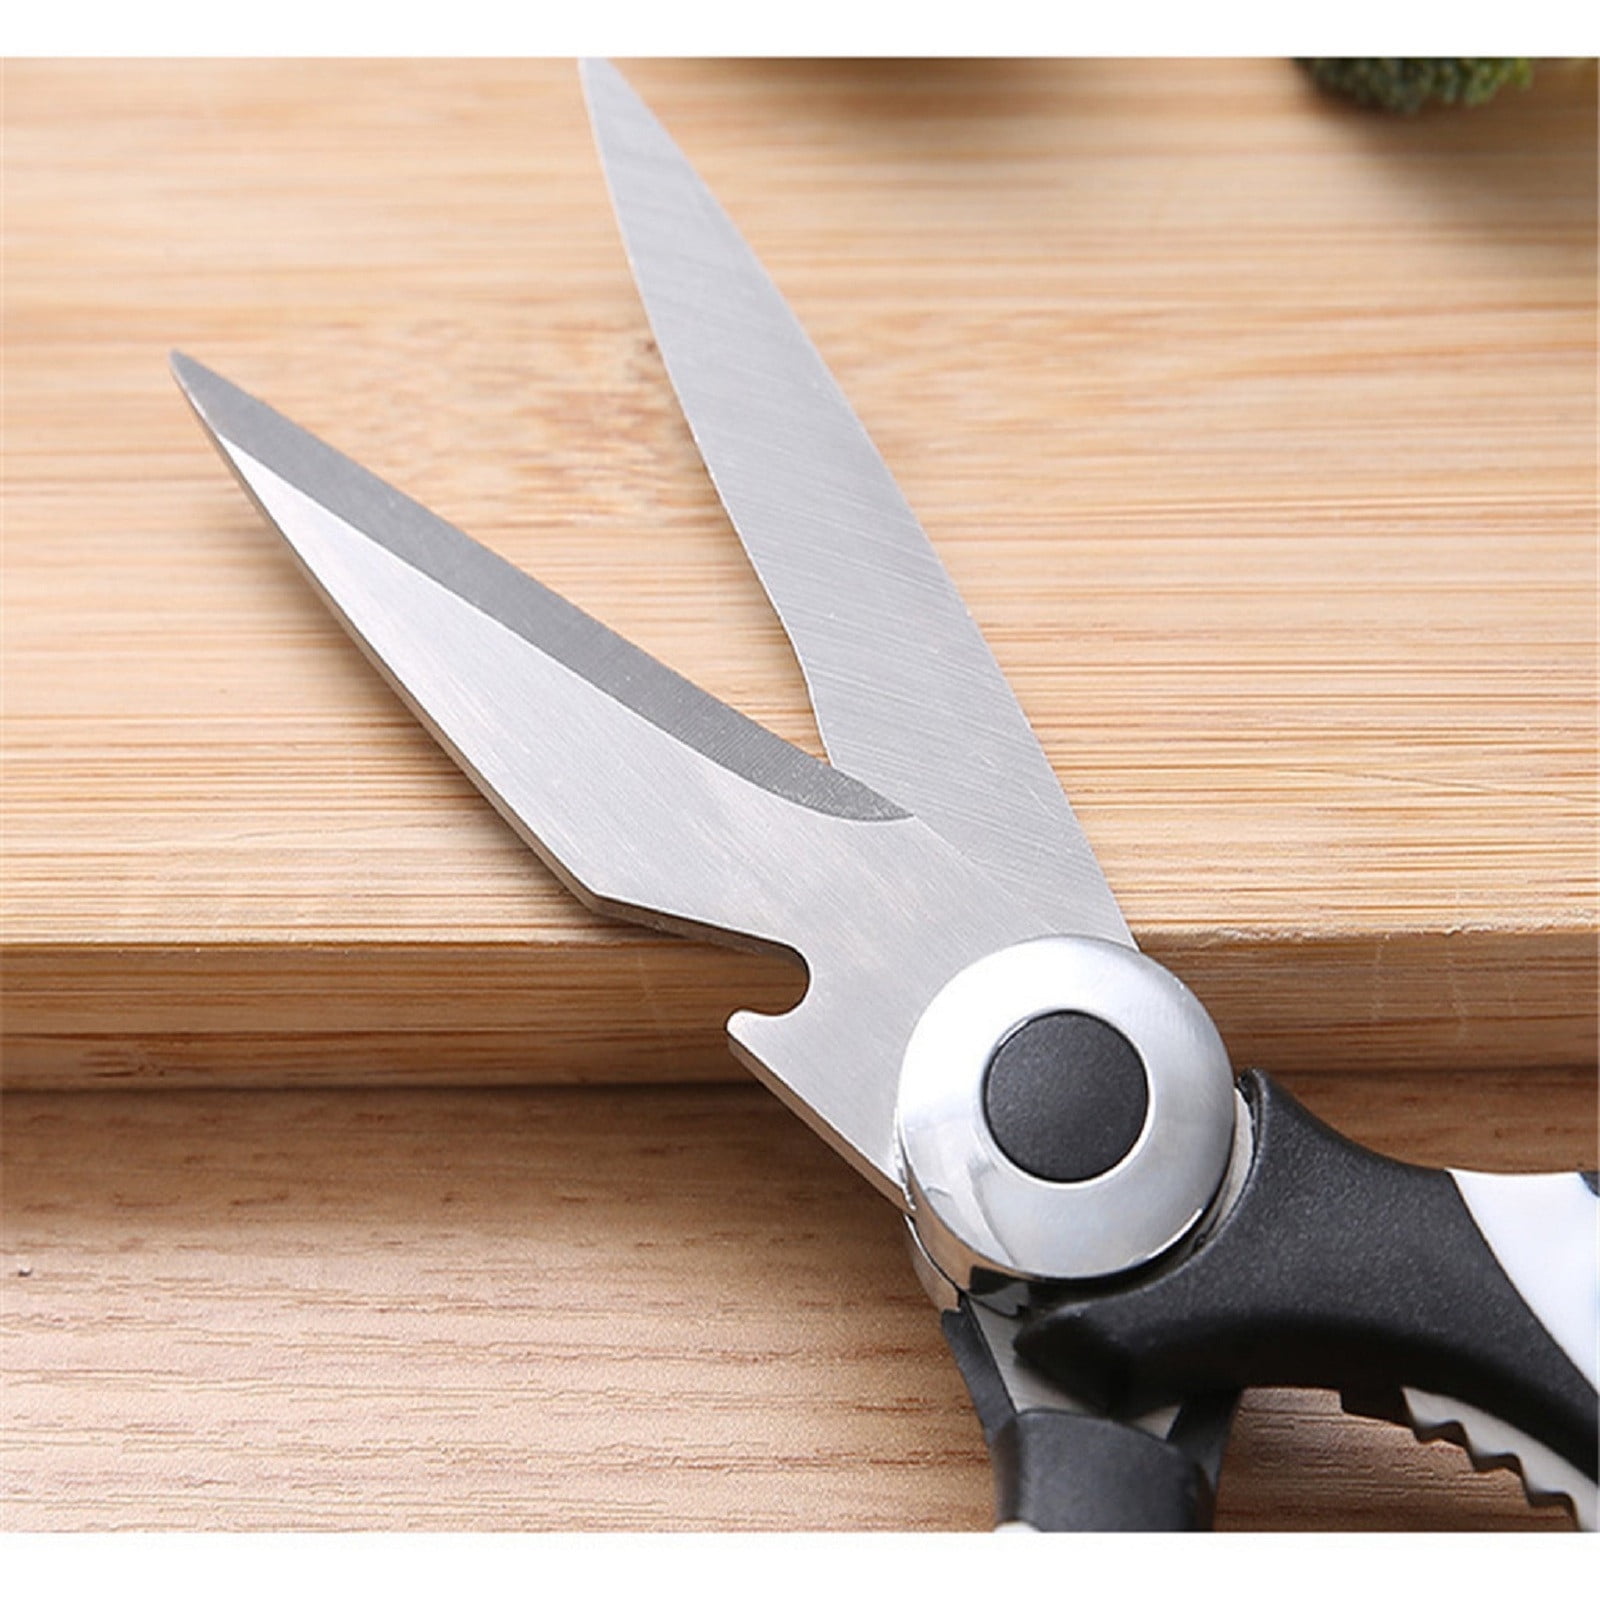  Shun Cutlery Kitchen Shears, Stainless Steel Cooking Scissors,  Blades Separate for Easy Cleaning, Comfortable, Non-Slip Handle, Kitchen  Shears Heavy Duty: Cutlery Shears: Home & Kitchen